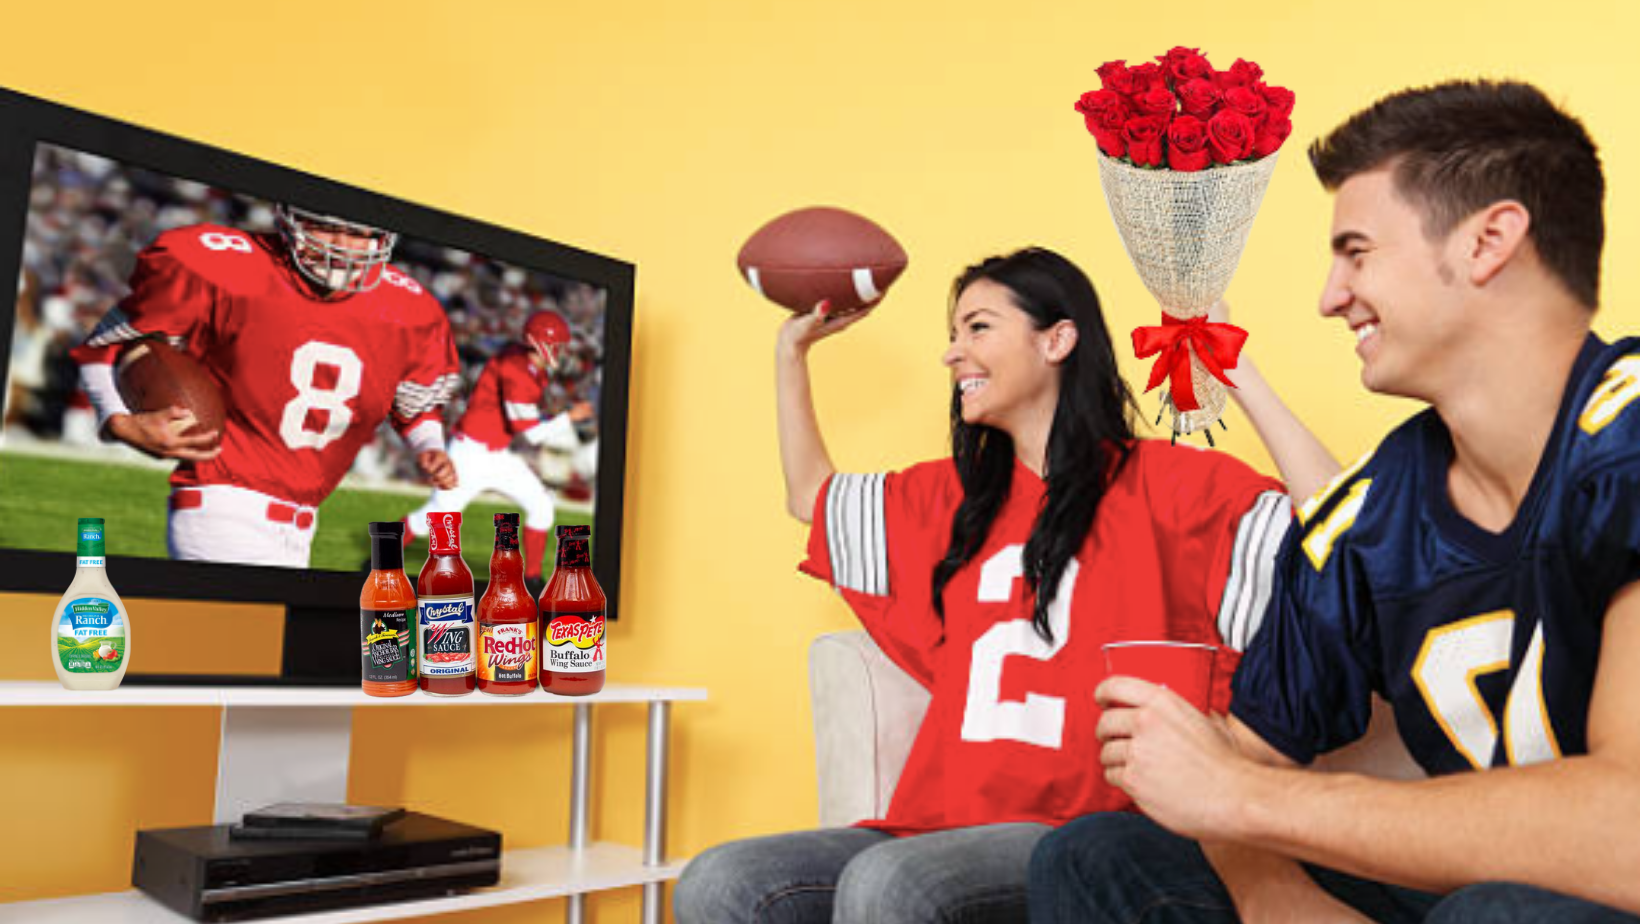 Put the ‘Game’ in Game Day! How to Transition Your Super Bowl Party Into Her Dream Date